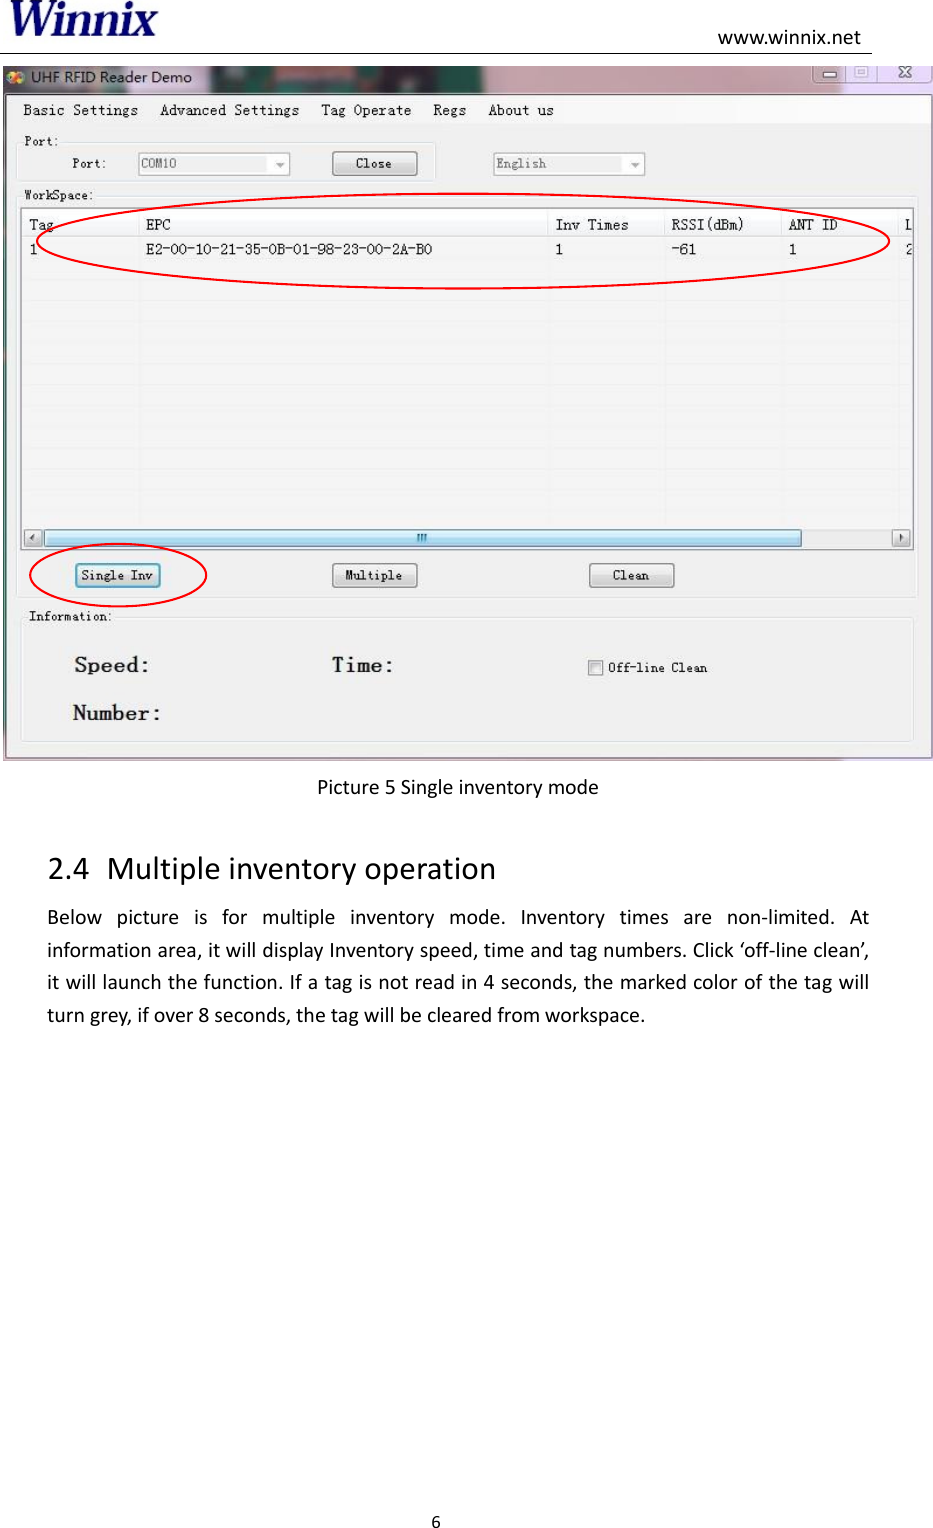                                                                                                    www.winnix.net 6   Picture 5 Single inventory mode  2.4 Multiple inventory operation Below  picture  is  for  multiple  inventory  mode.  Inventory  times  are  non-limited.  At information area, it will display Inventory speed, time and tag numbers. Click off-line clean, it will launch the function. If a tag is not read in 4 seconds, the marked color of the tag will turn grey, if over 8 seconds, the tag will be cleared from workspace. 